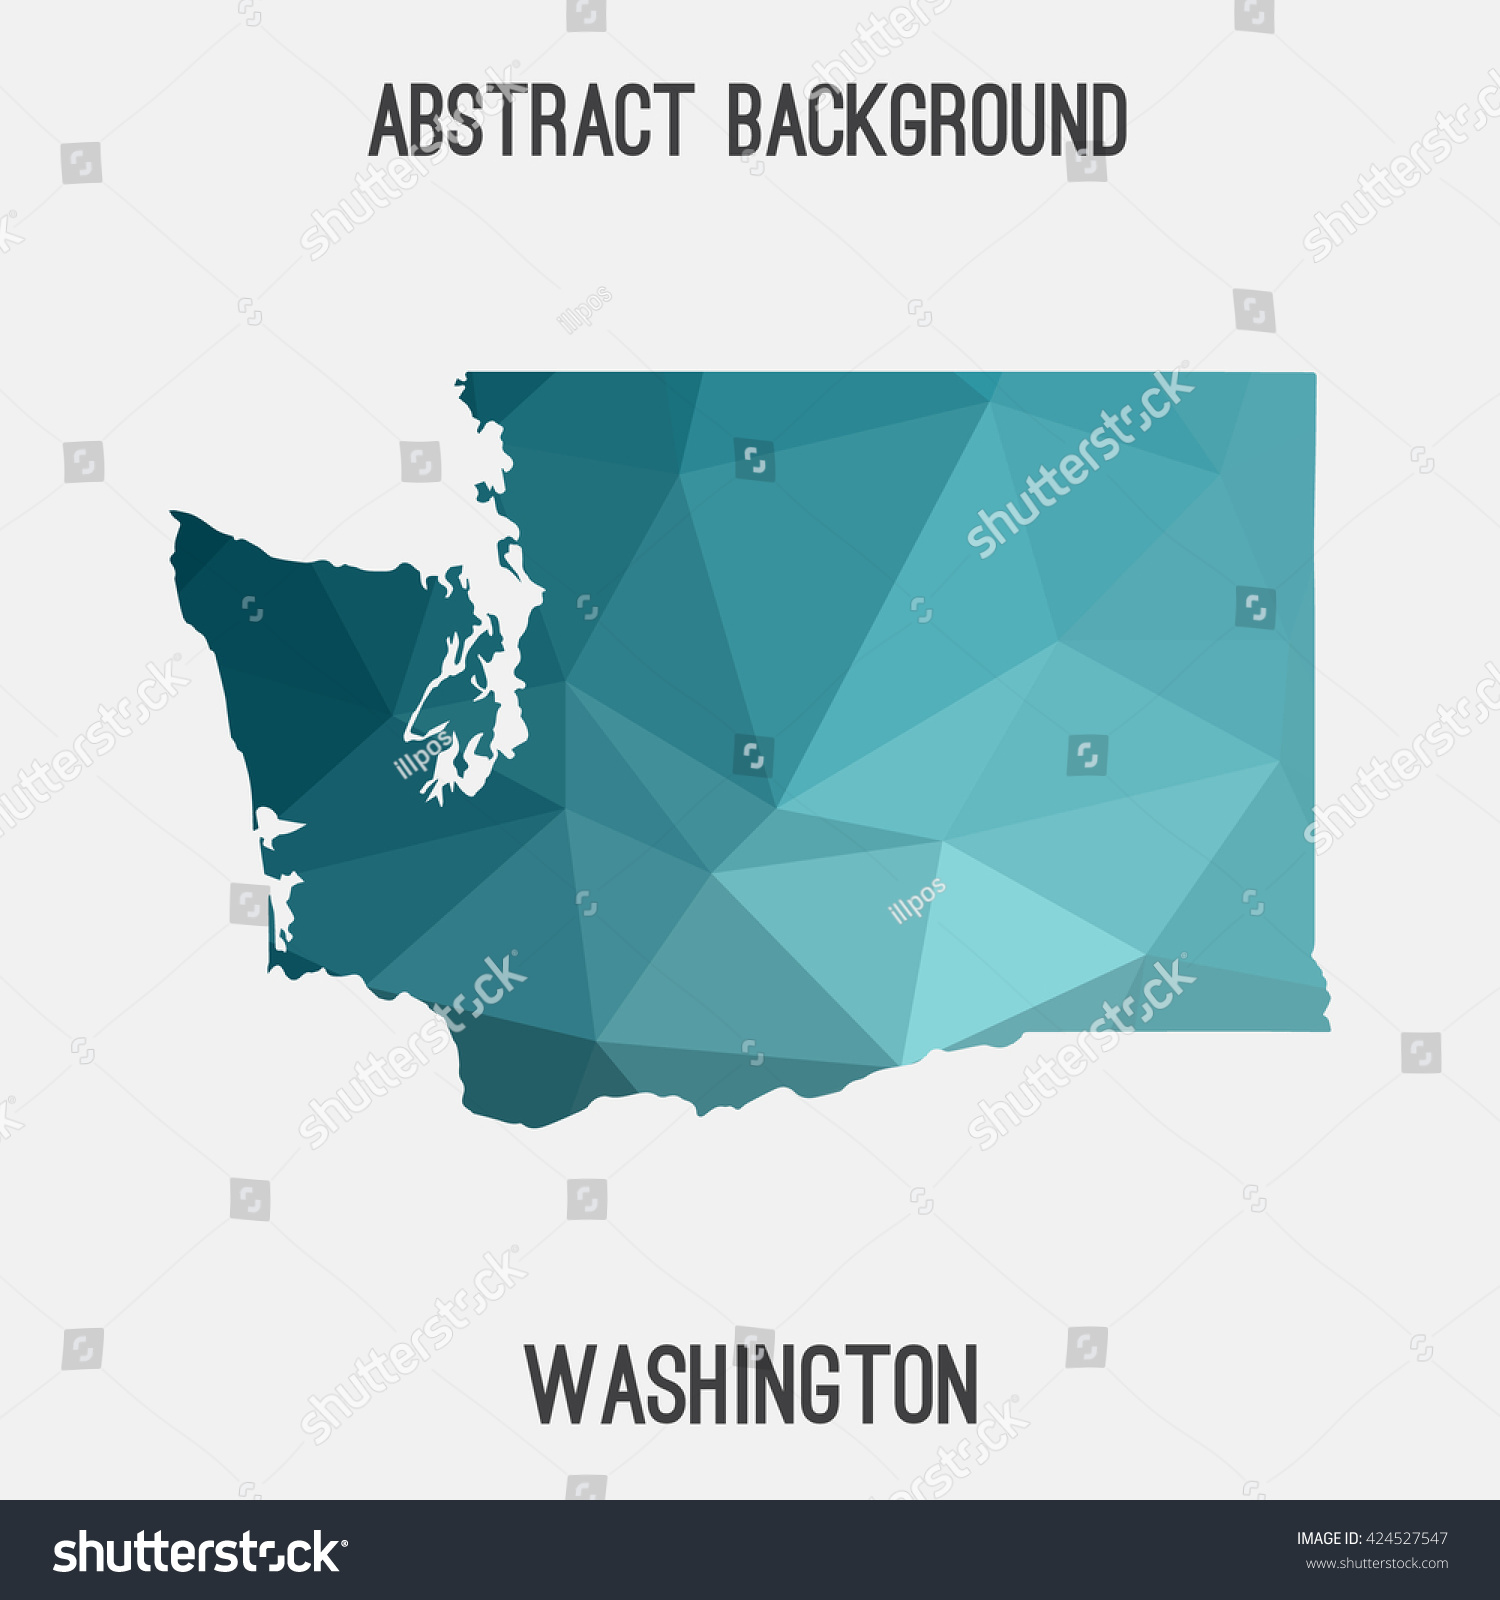 SVG of Washington map in geometric polygonal style.Abstract tessellation,modern design background. Vector illustration EPS8 svg